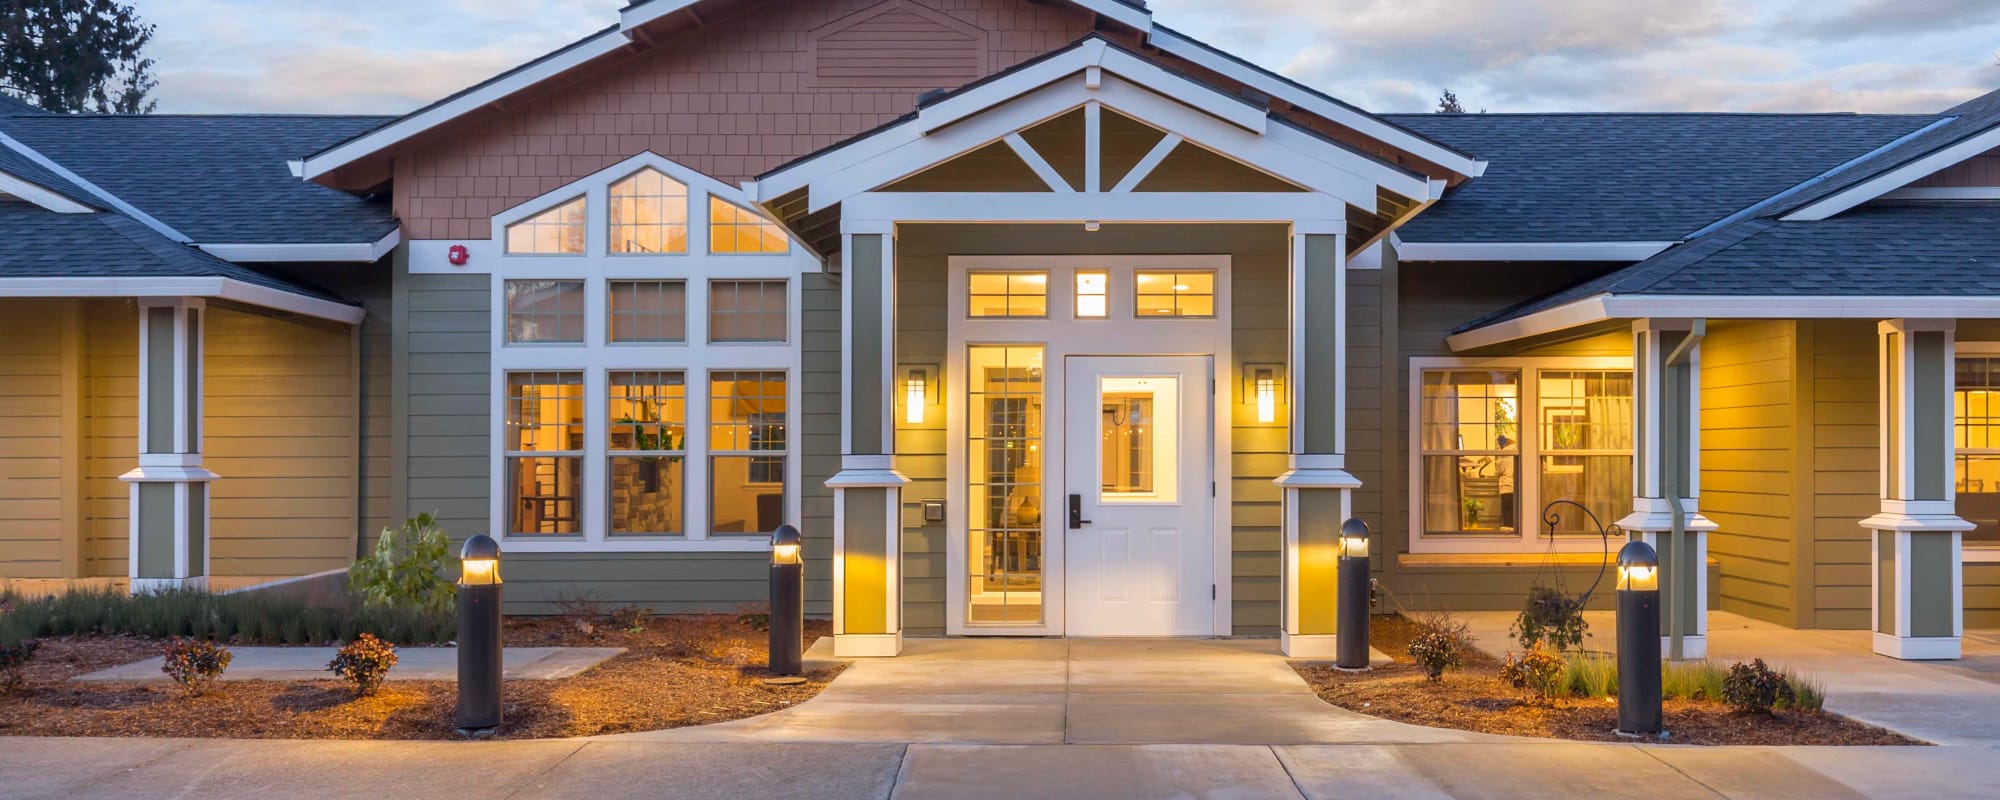 Well-lit front door entrance at The Springs at Clackamas Woods in Milwaukie, Oregon